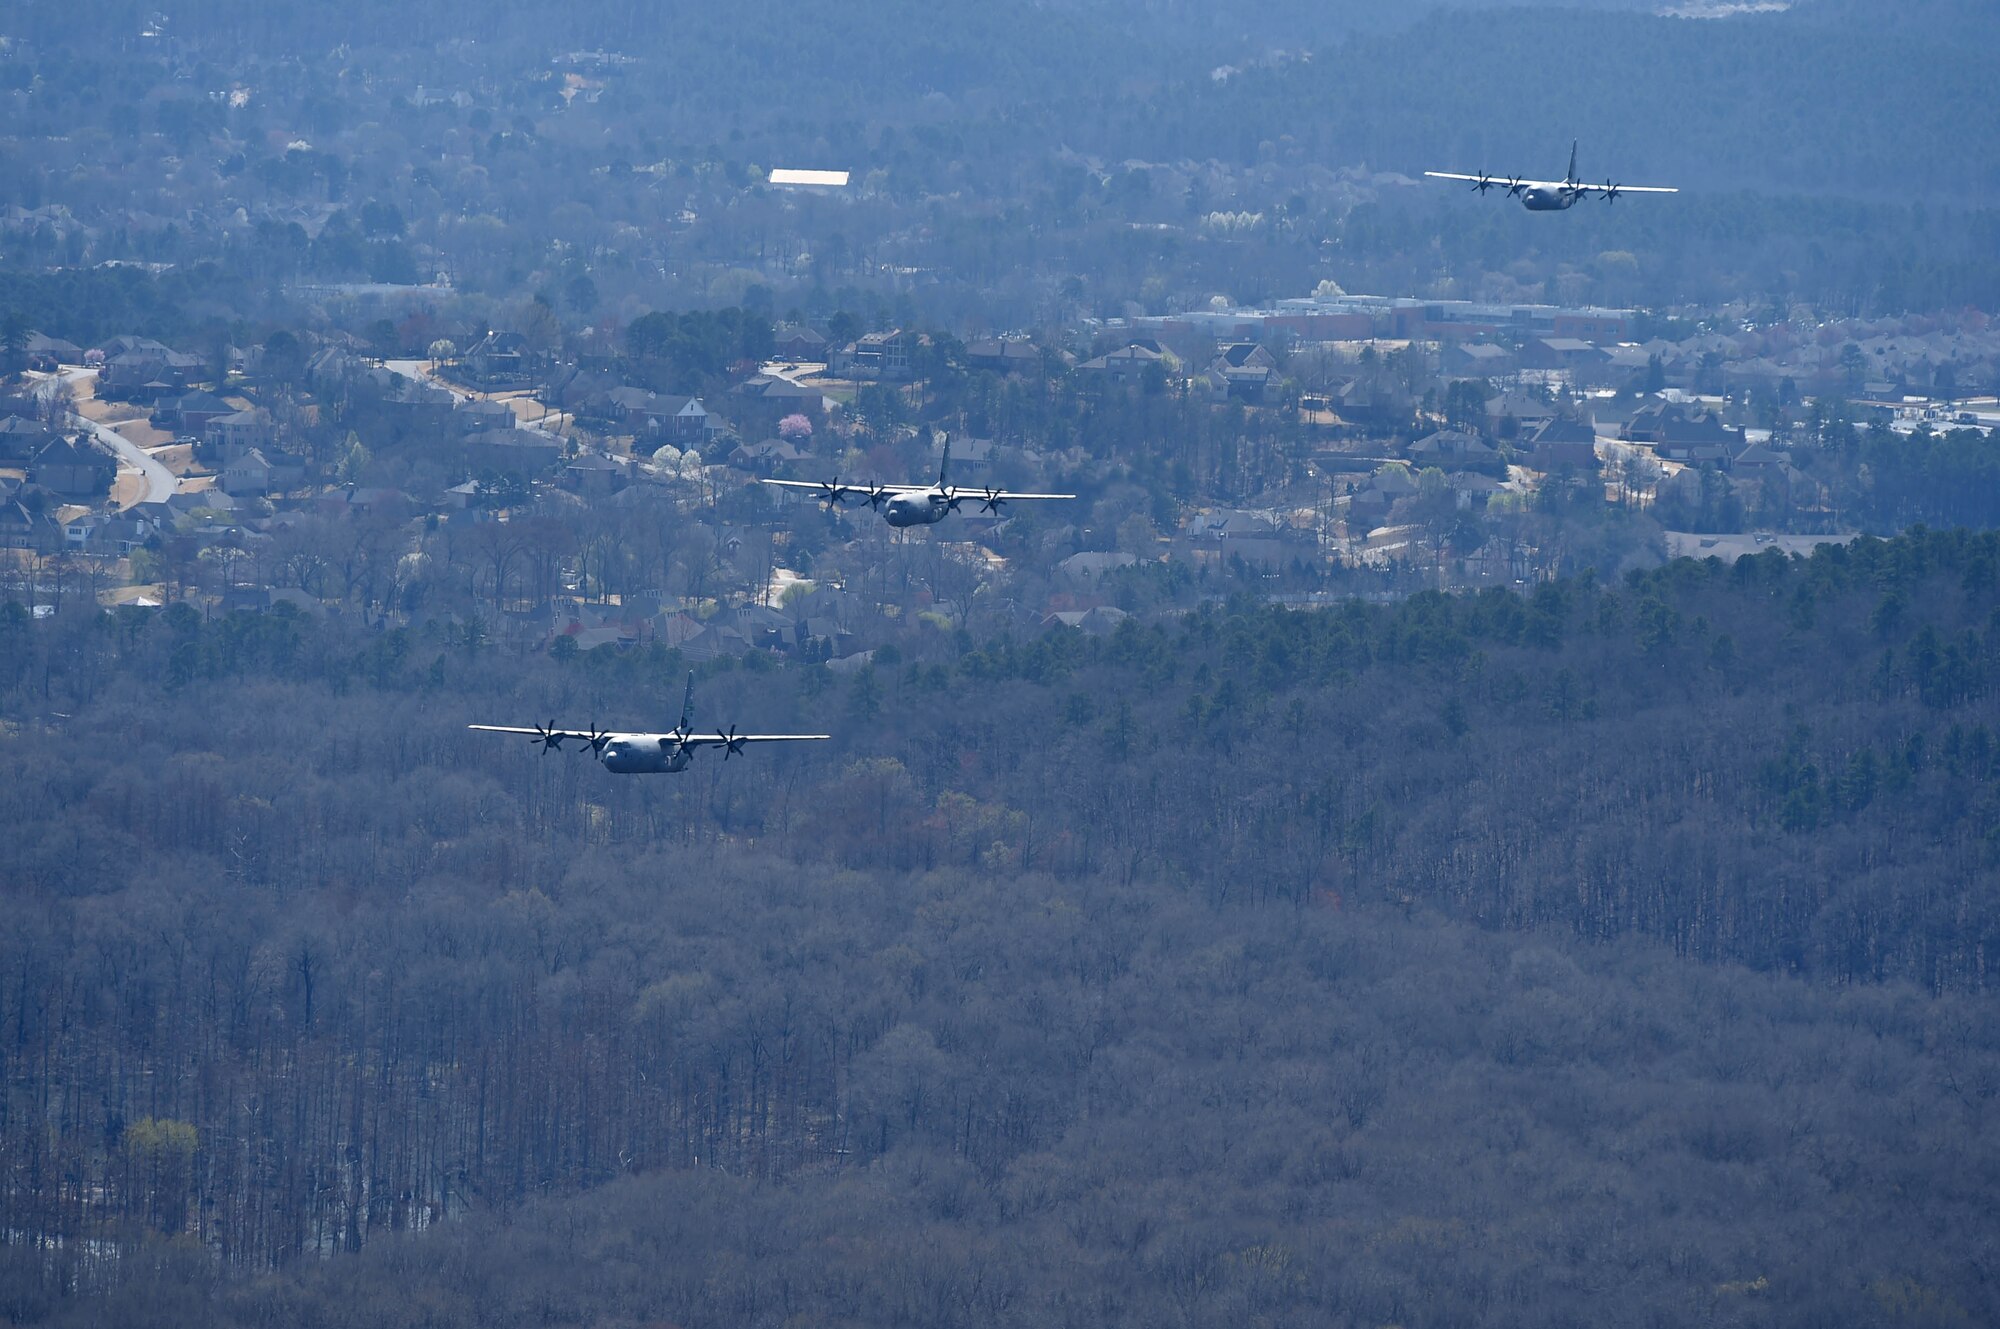 The aircraft flying in formation along a river.